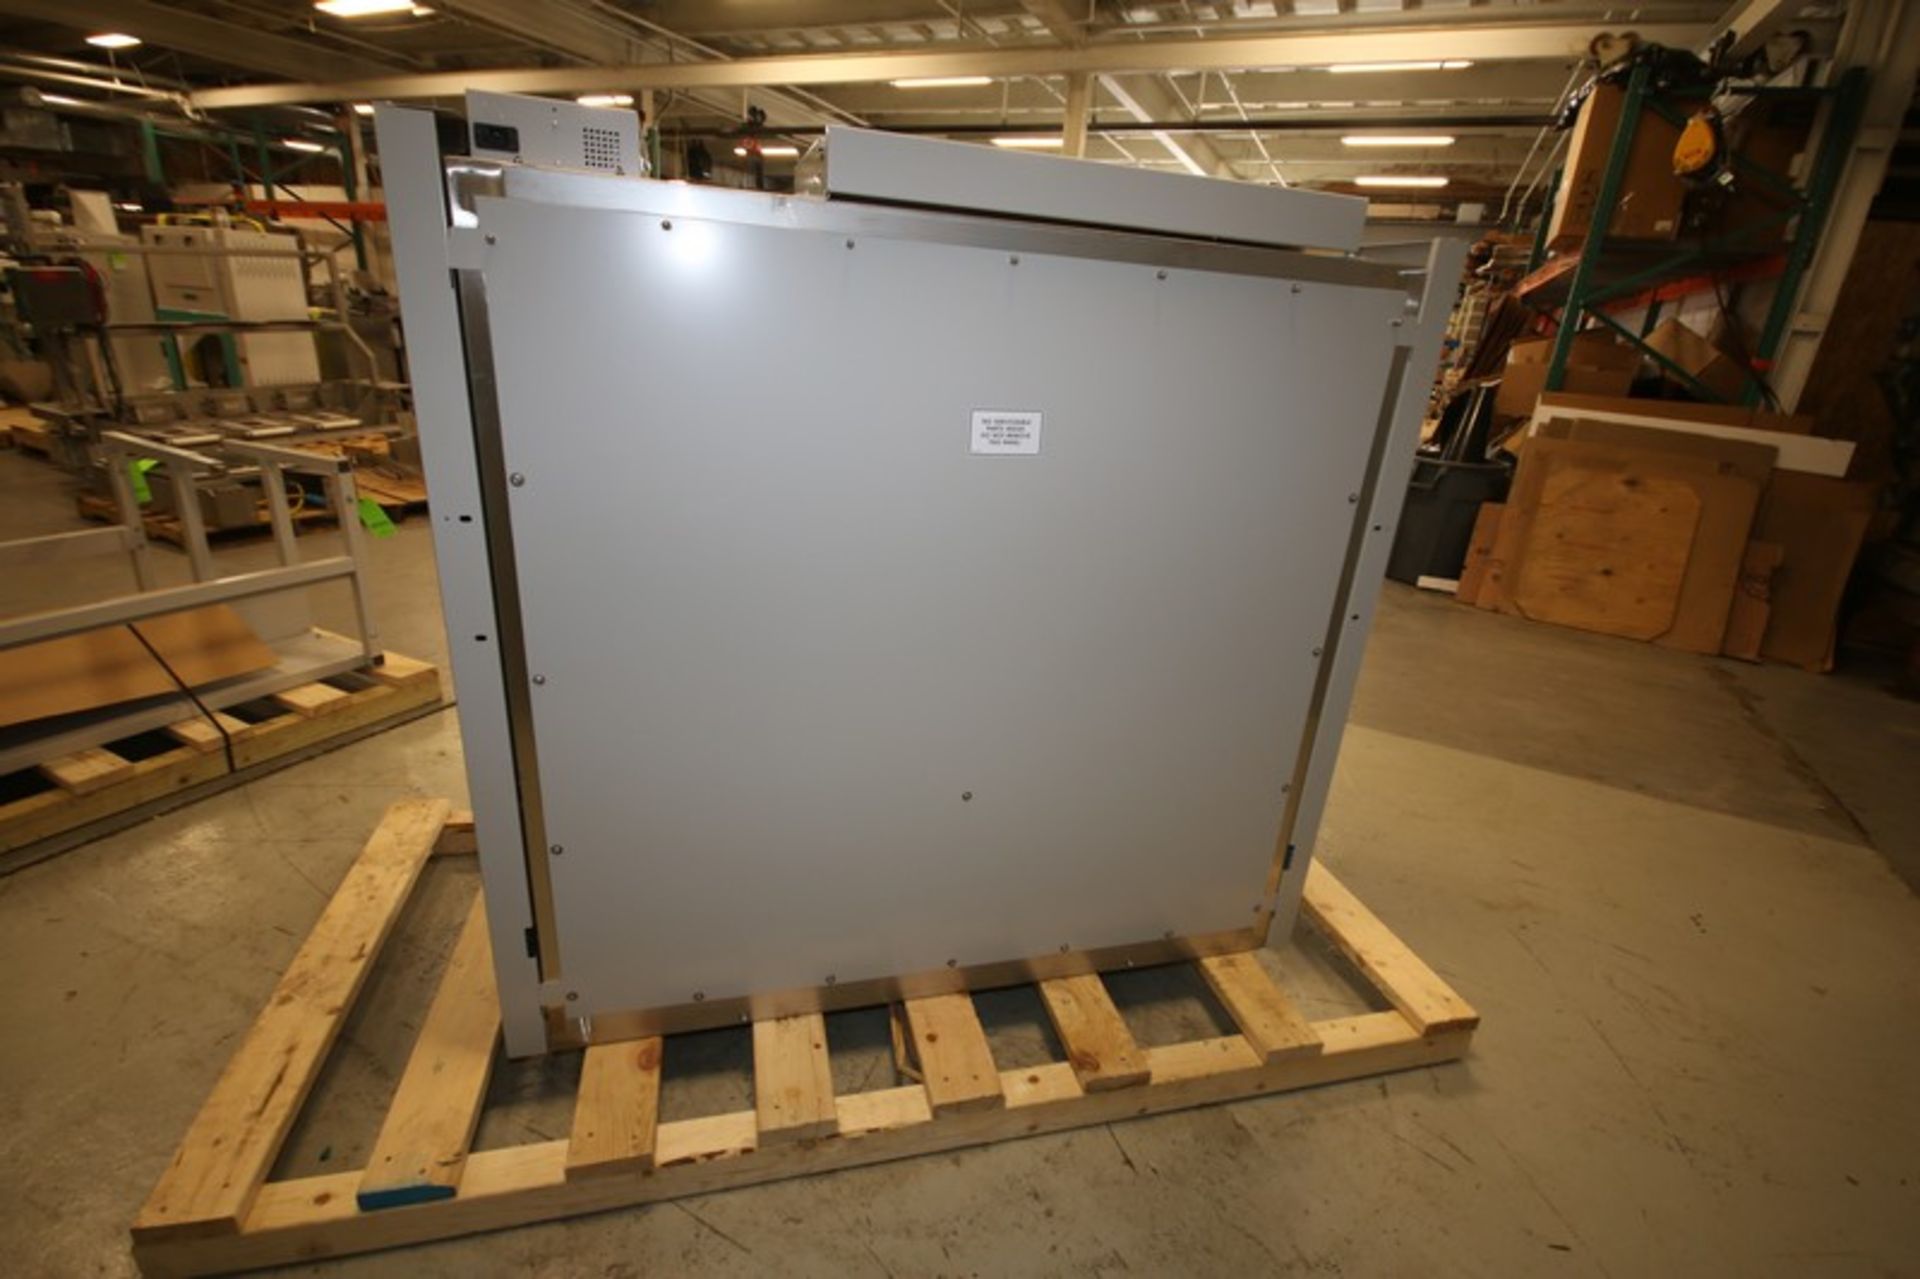 Labconco Aprox. 66" L x 31" W x 62" H A2 Lab Fume Hood, Cat. No. 302519100, SN 171150443 B with - Image 4 of 10